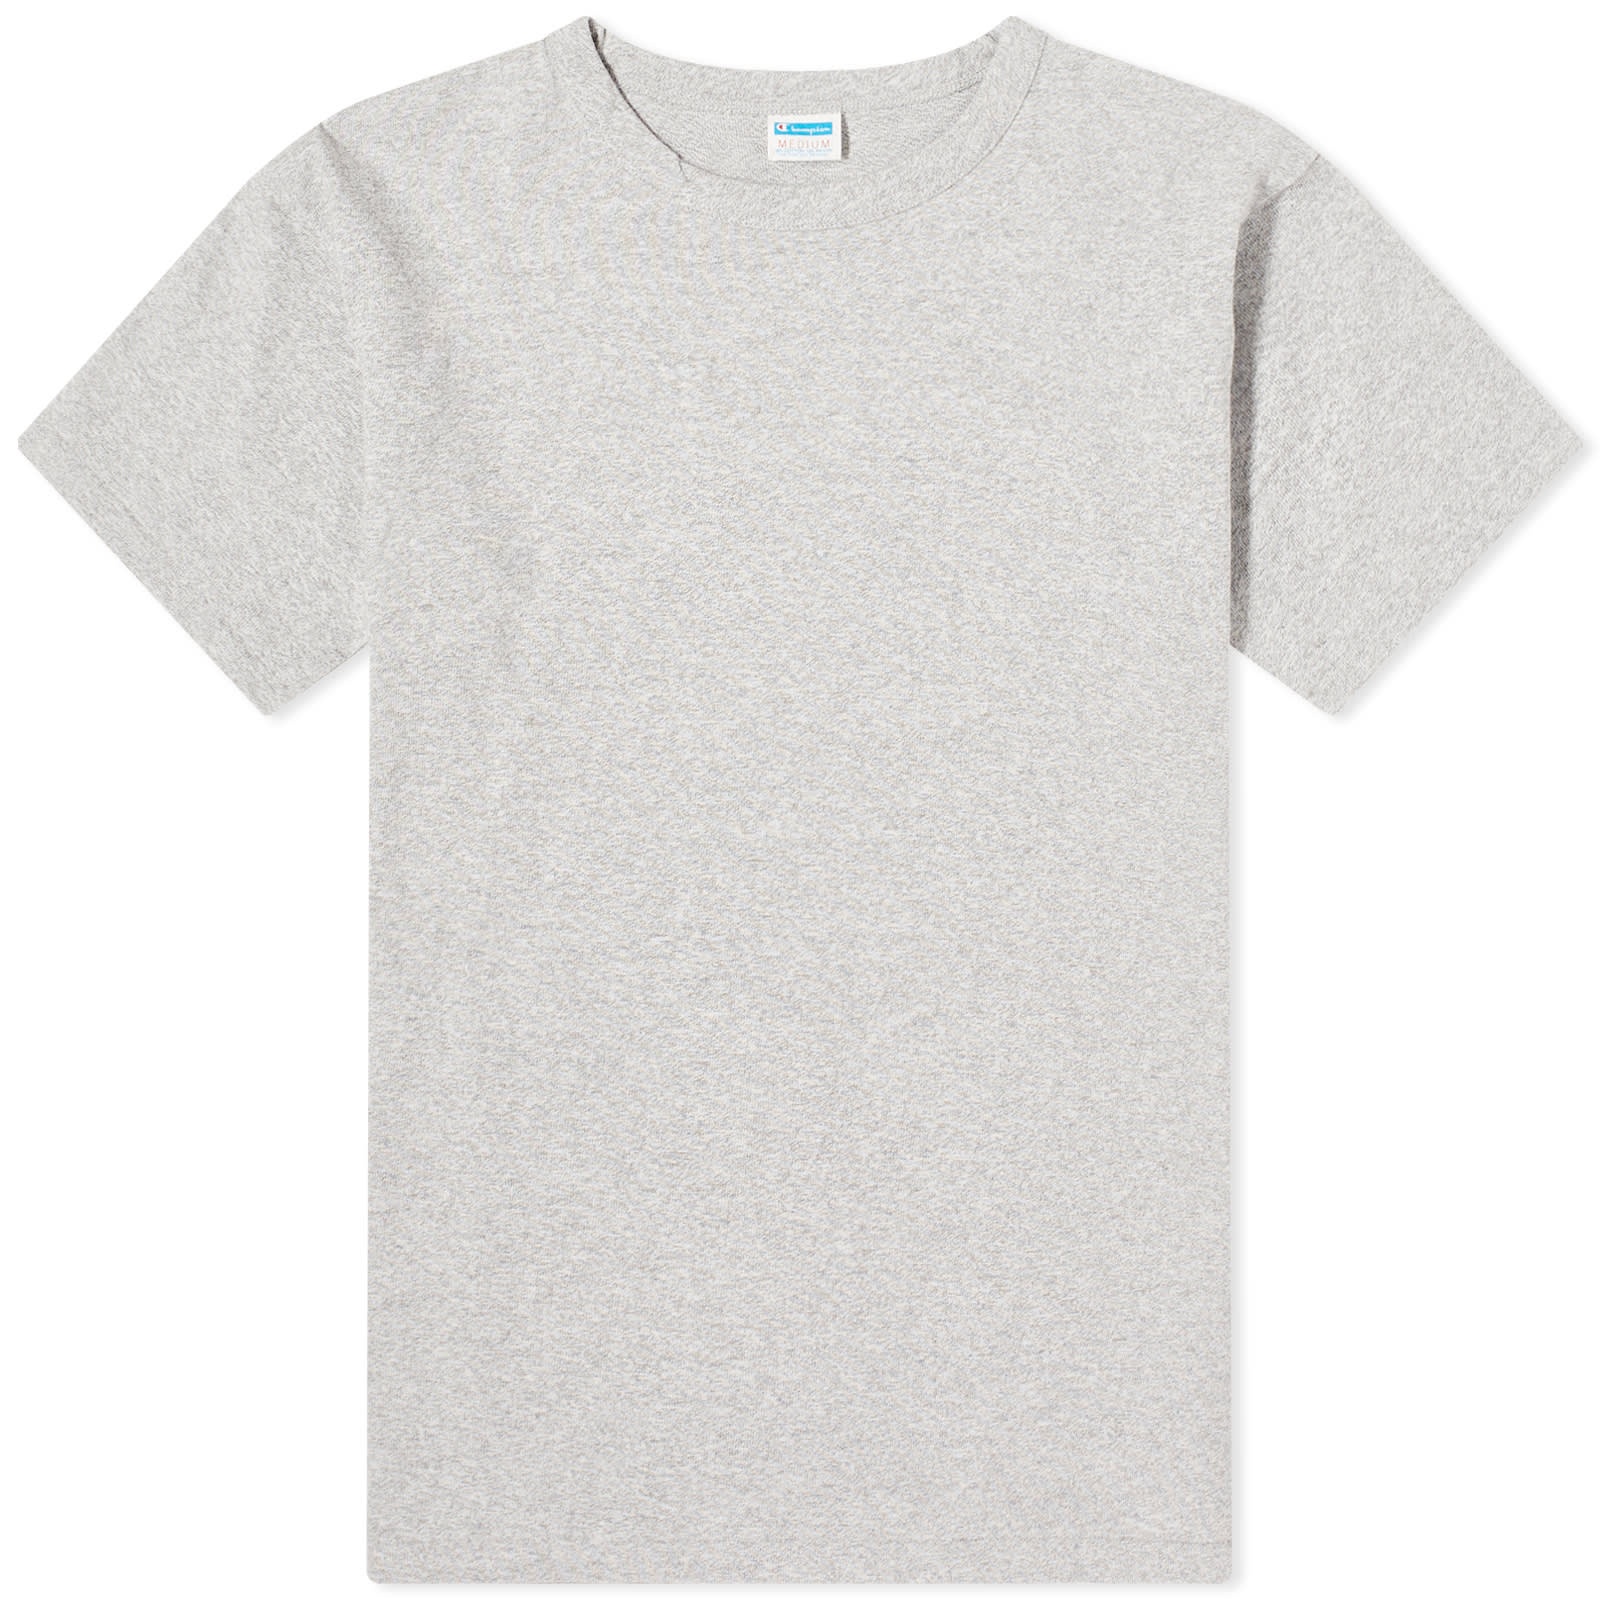 Champion Made in Japan T-Shirt - 1